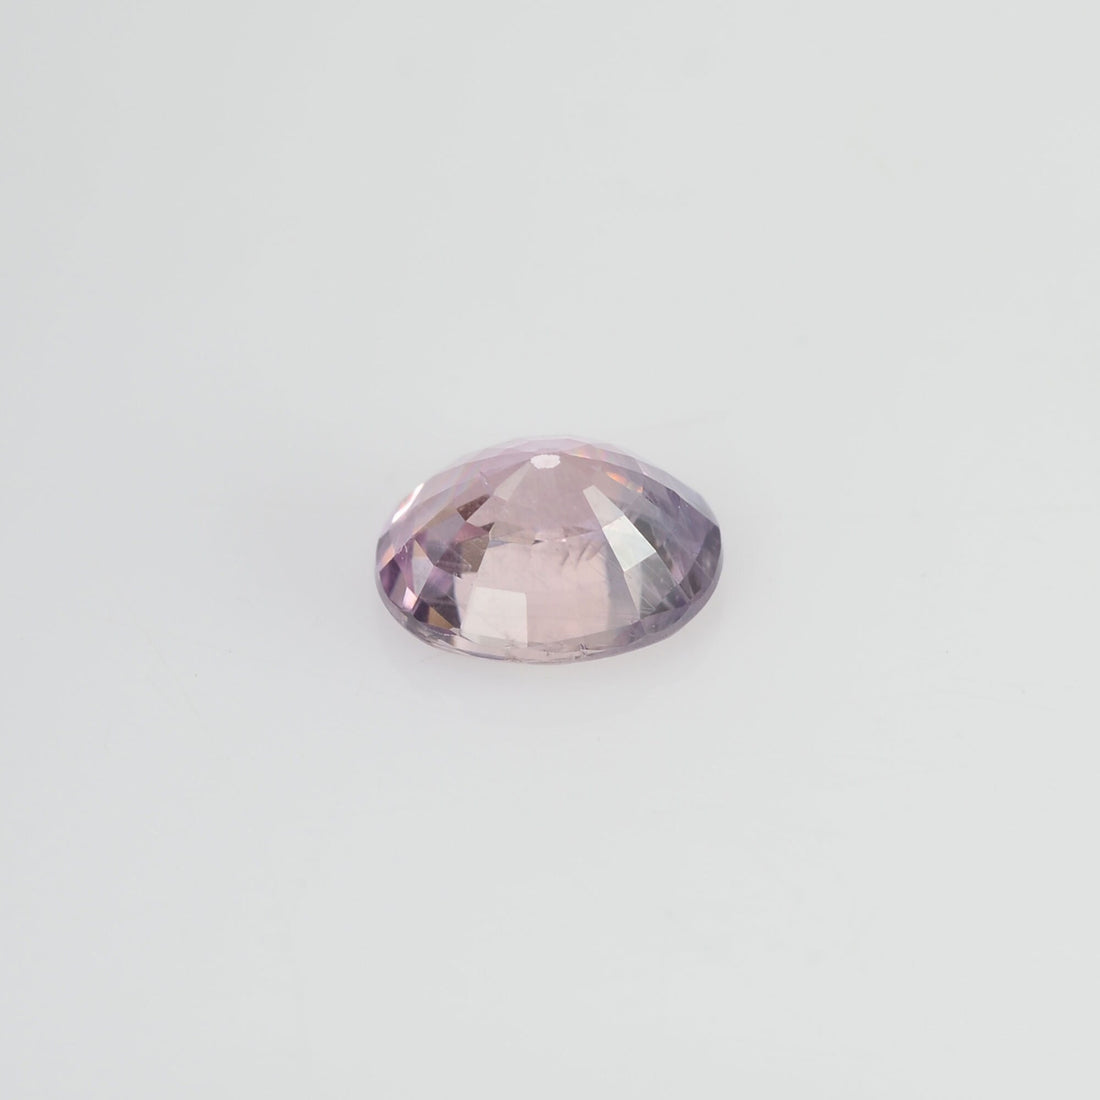 0.80 cts Natural Fancy Bi-Color Sapphire Loose Gemstone oval Cut